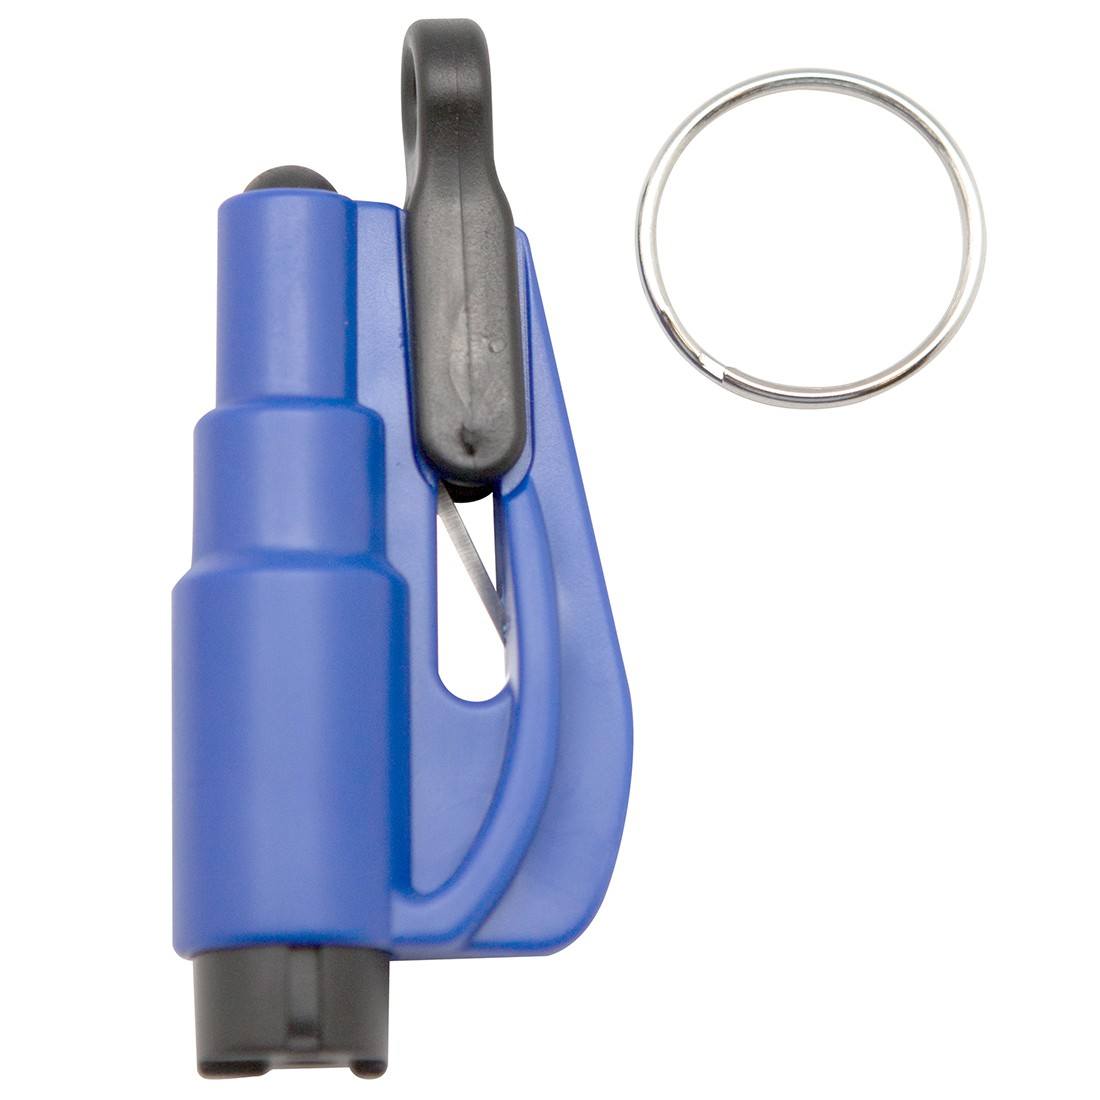 Blue Key Chain Glass Breaker for Home and Car with Belt Cutter